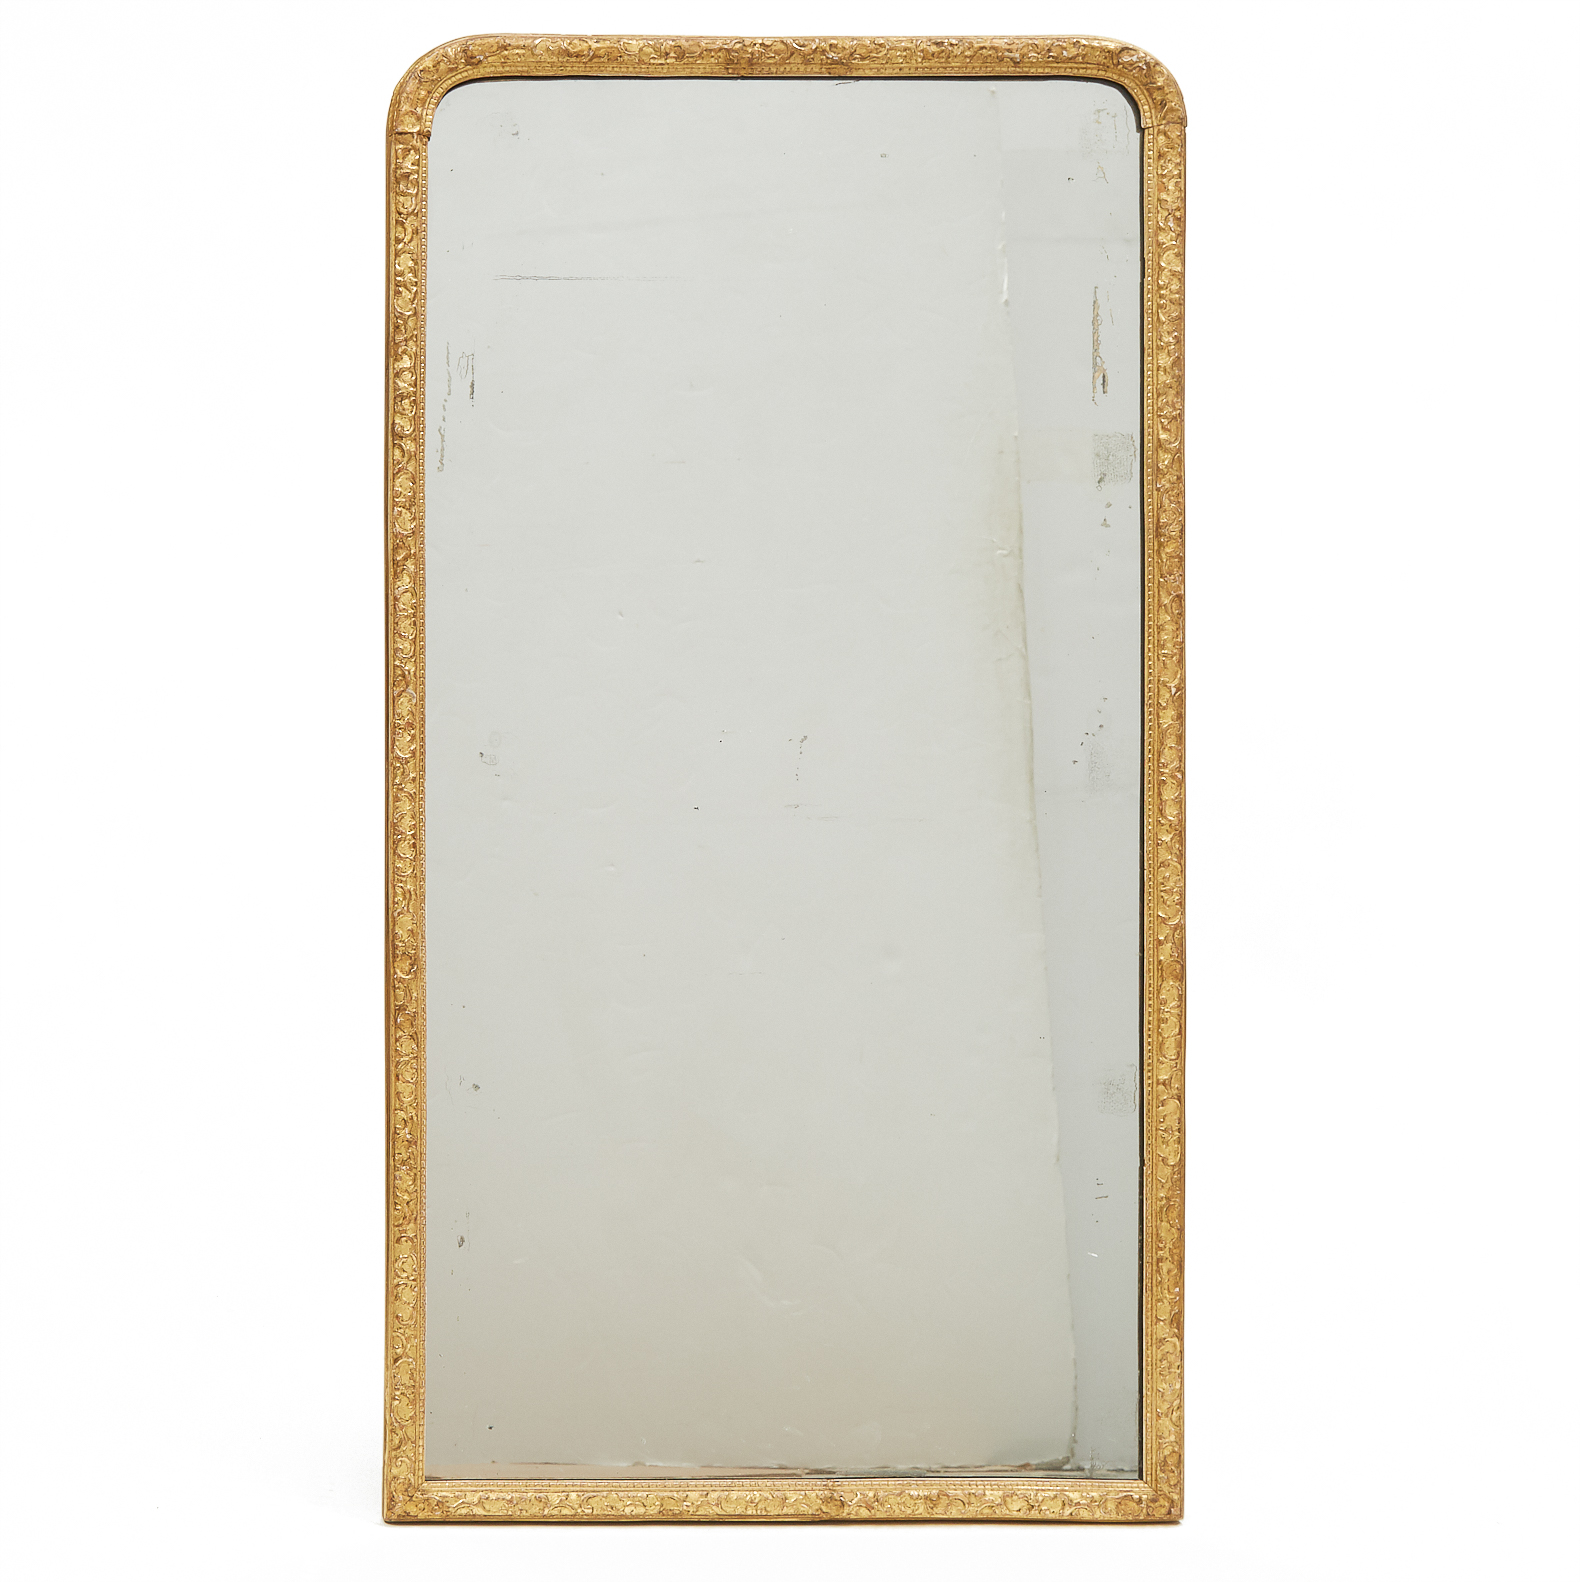 Giltwood Framed Pier Glass, early-mid 20th century